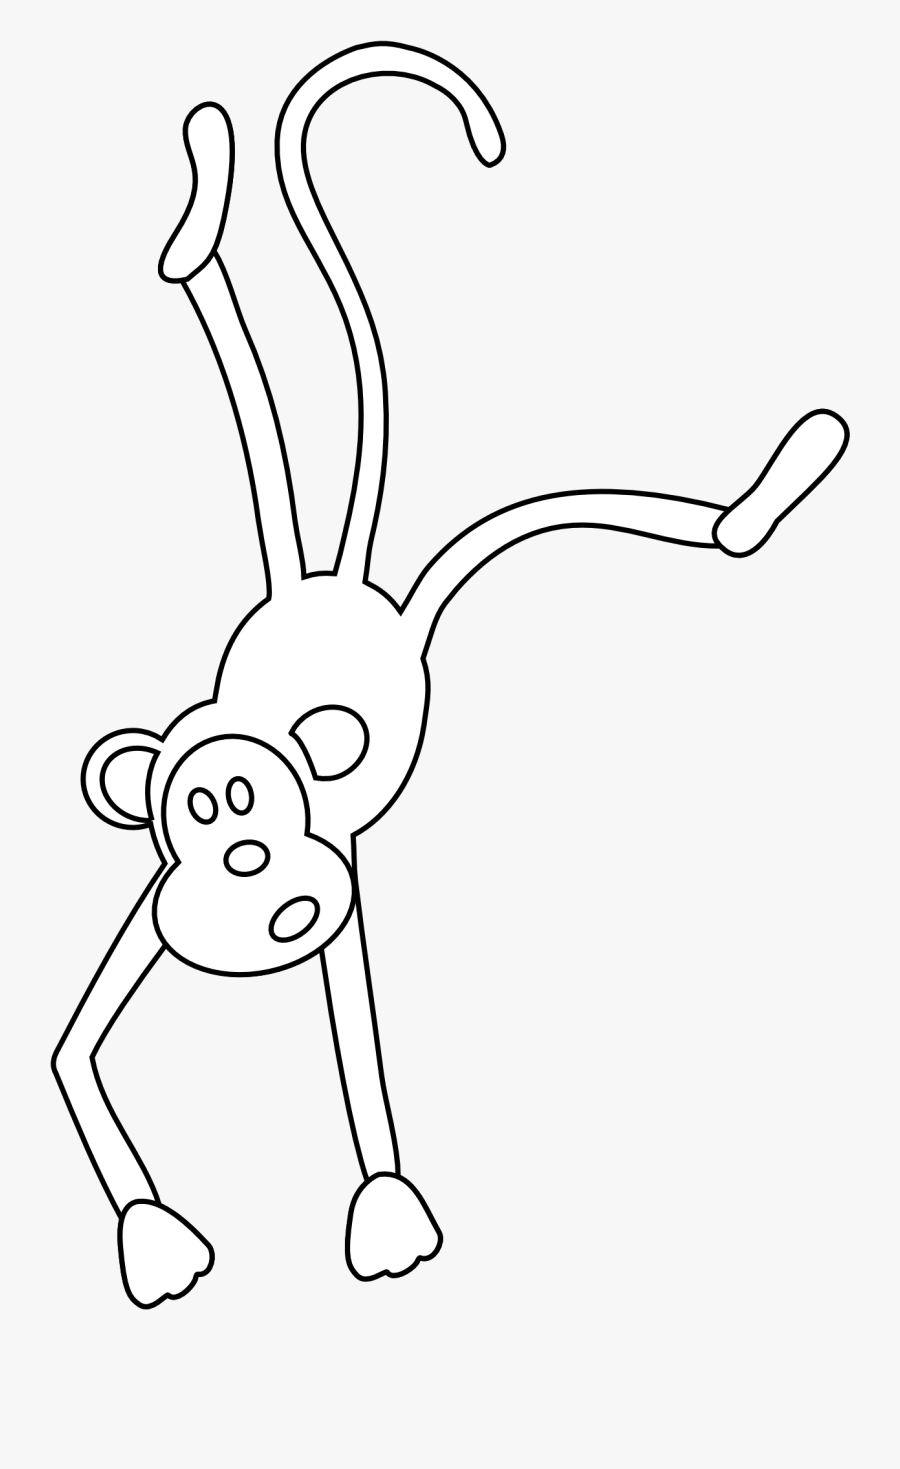 Monkey Clipart Black And White Png - Monkey Black White Png, Transparent Clipart